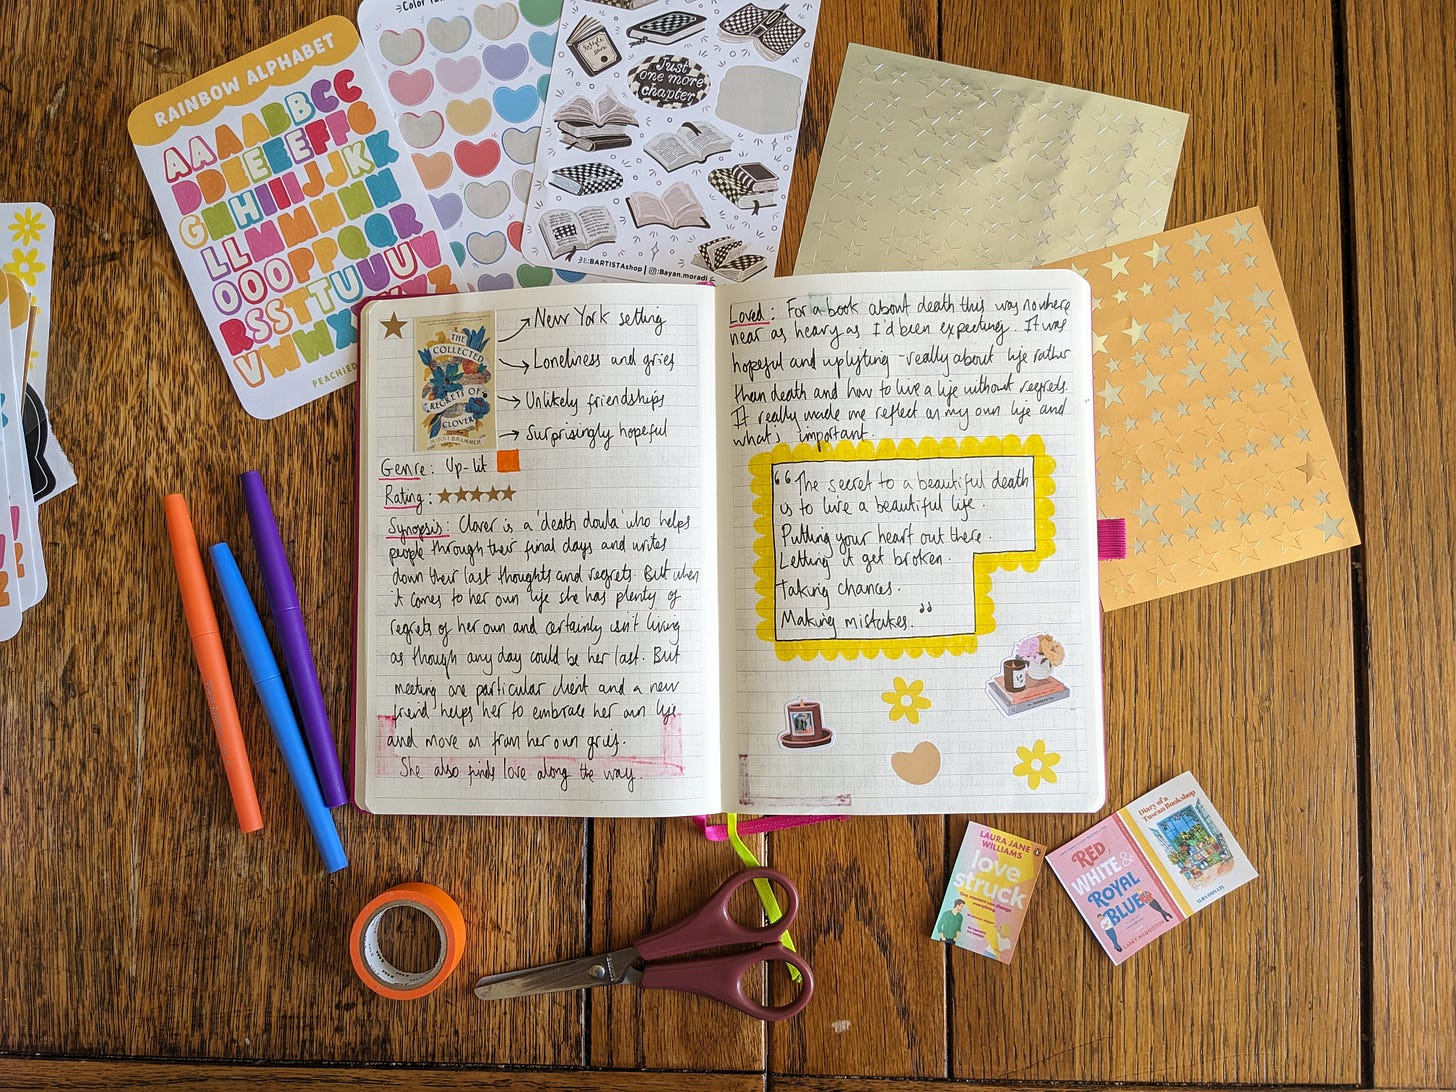 A notebook is open on a table, surrounded by stickers and pens.